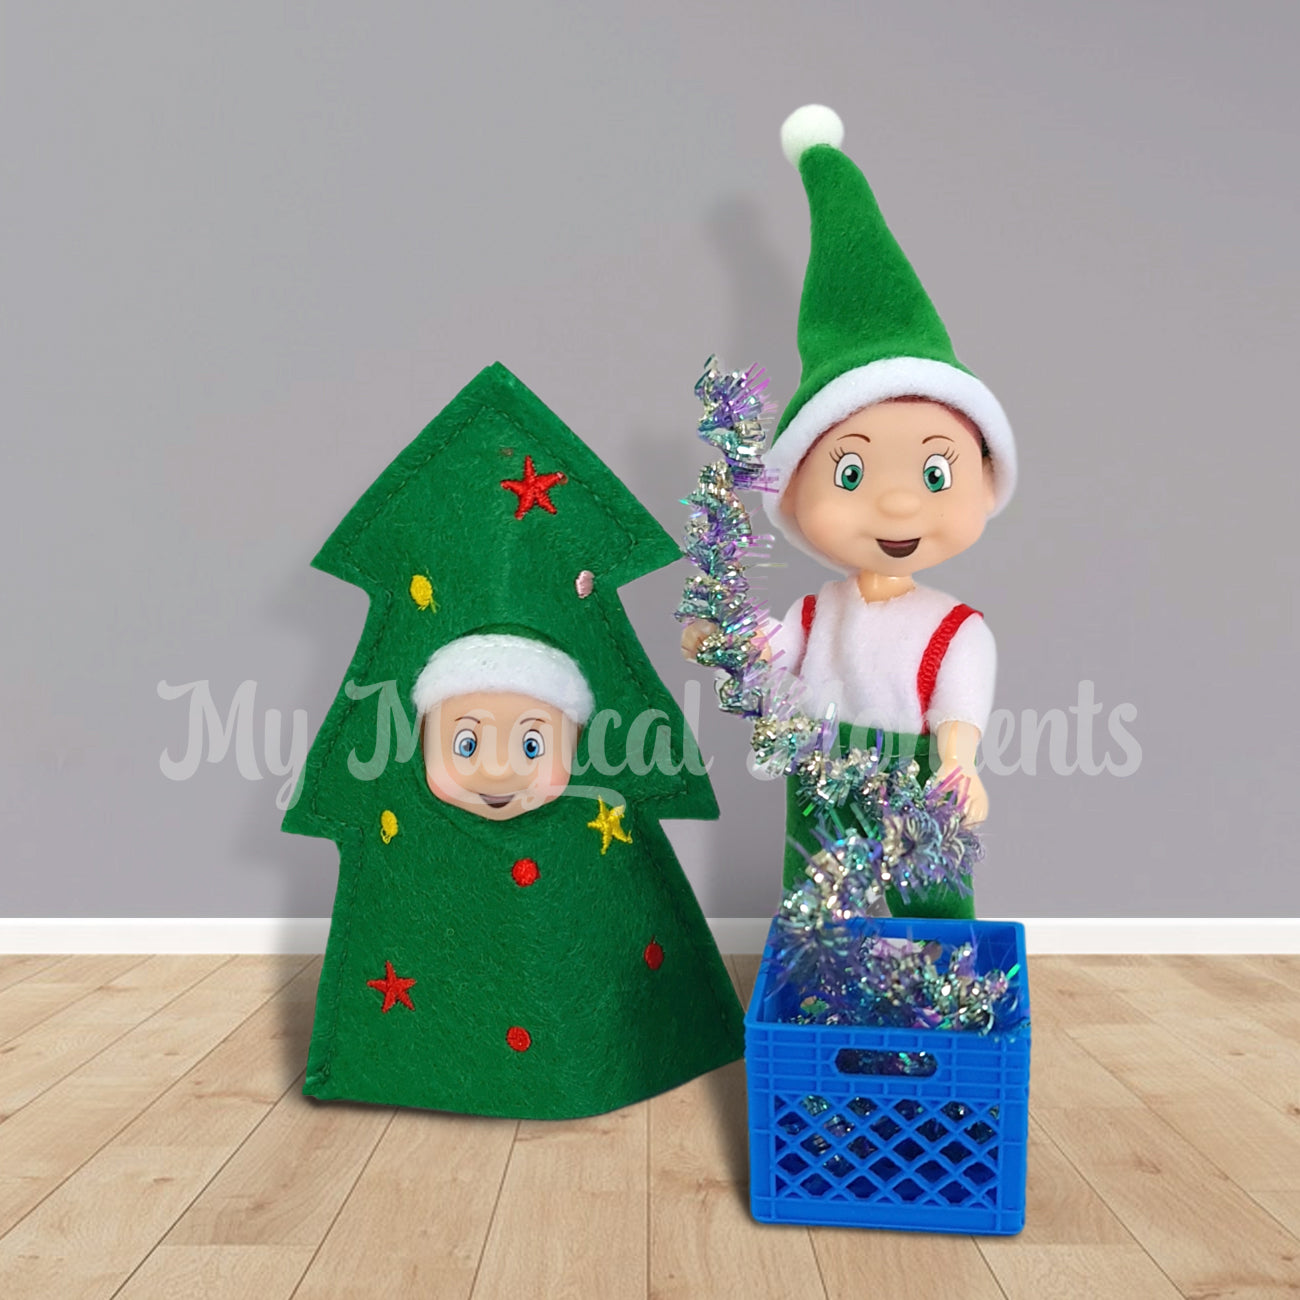 Toddler elf decorating a baby elf in a tree costume